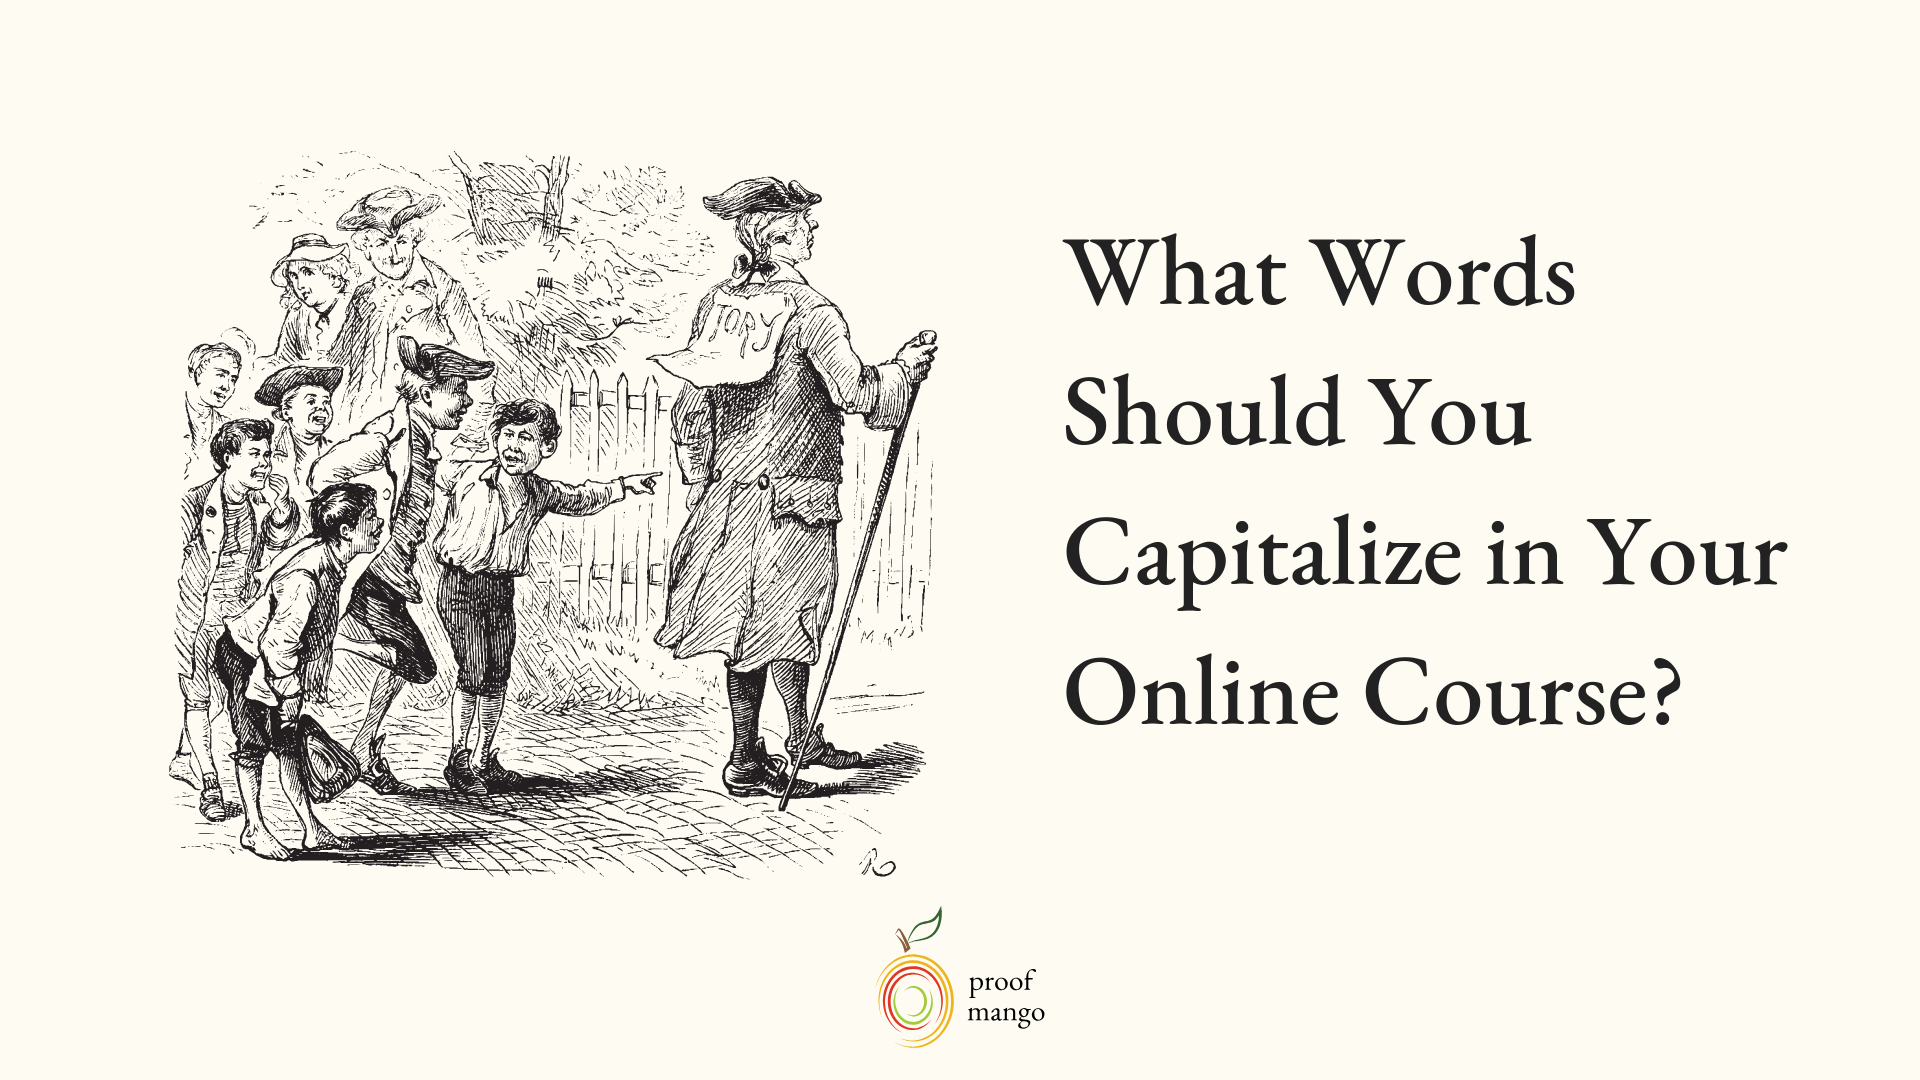 What Words Should You Capitalize in Your Online Course